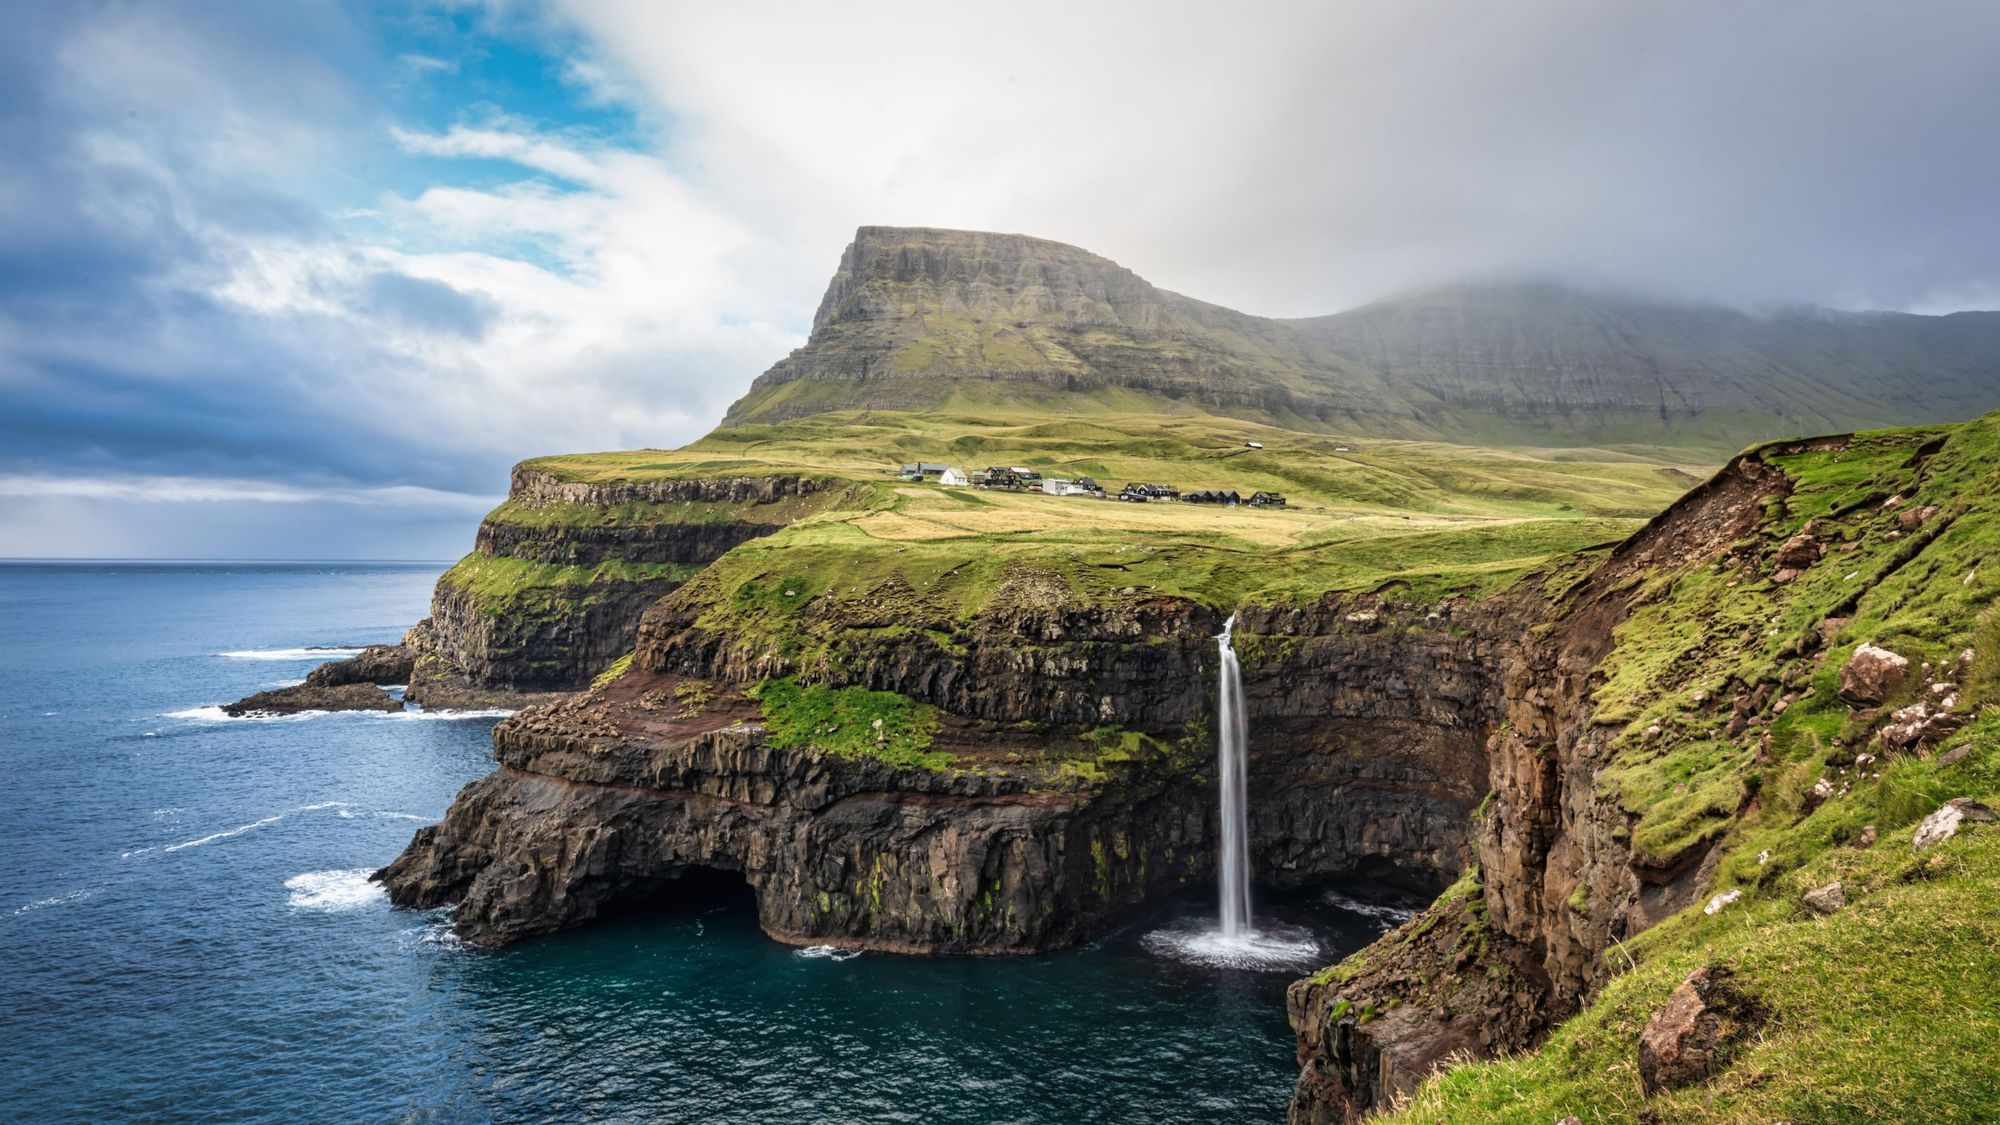 The Múlafossur Waterfall and Gasadalur village on Vágar Island, one of the most photogenic spots on the Faroe Islands. Photo: Getty